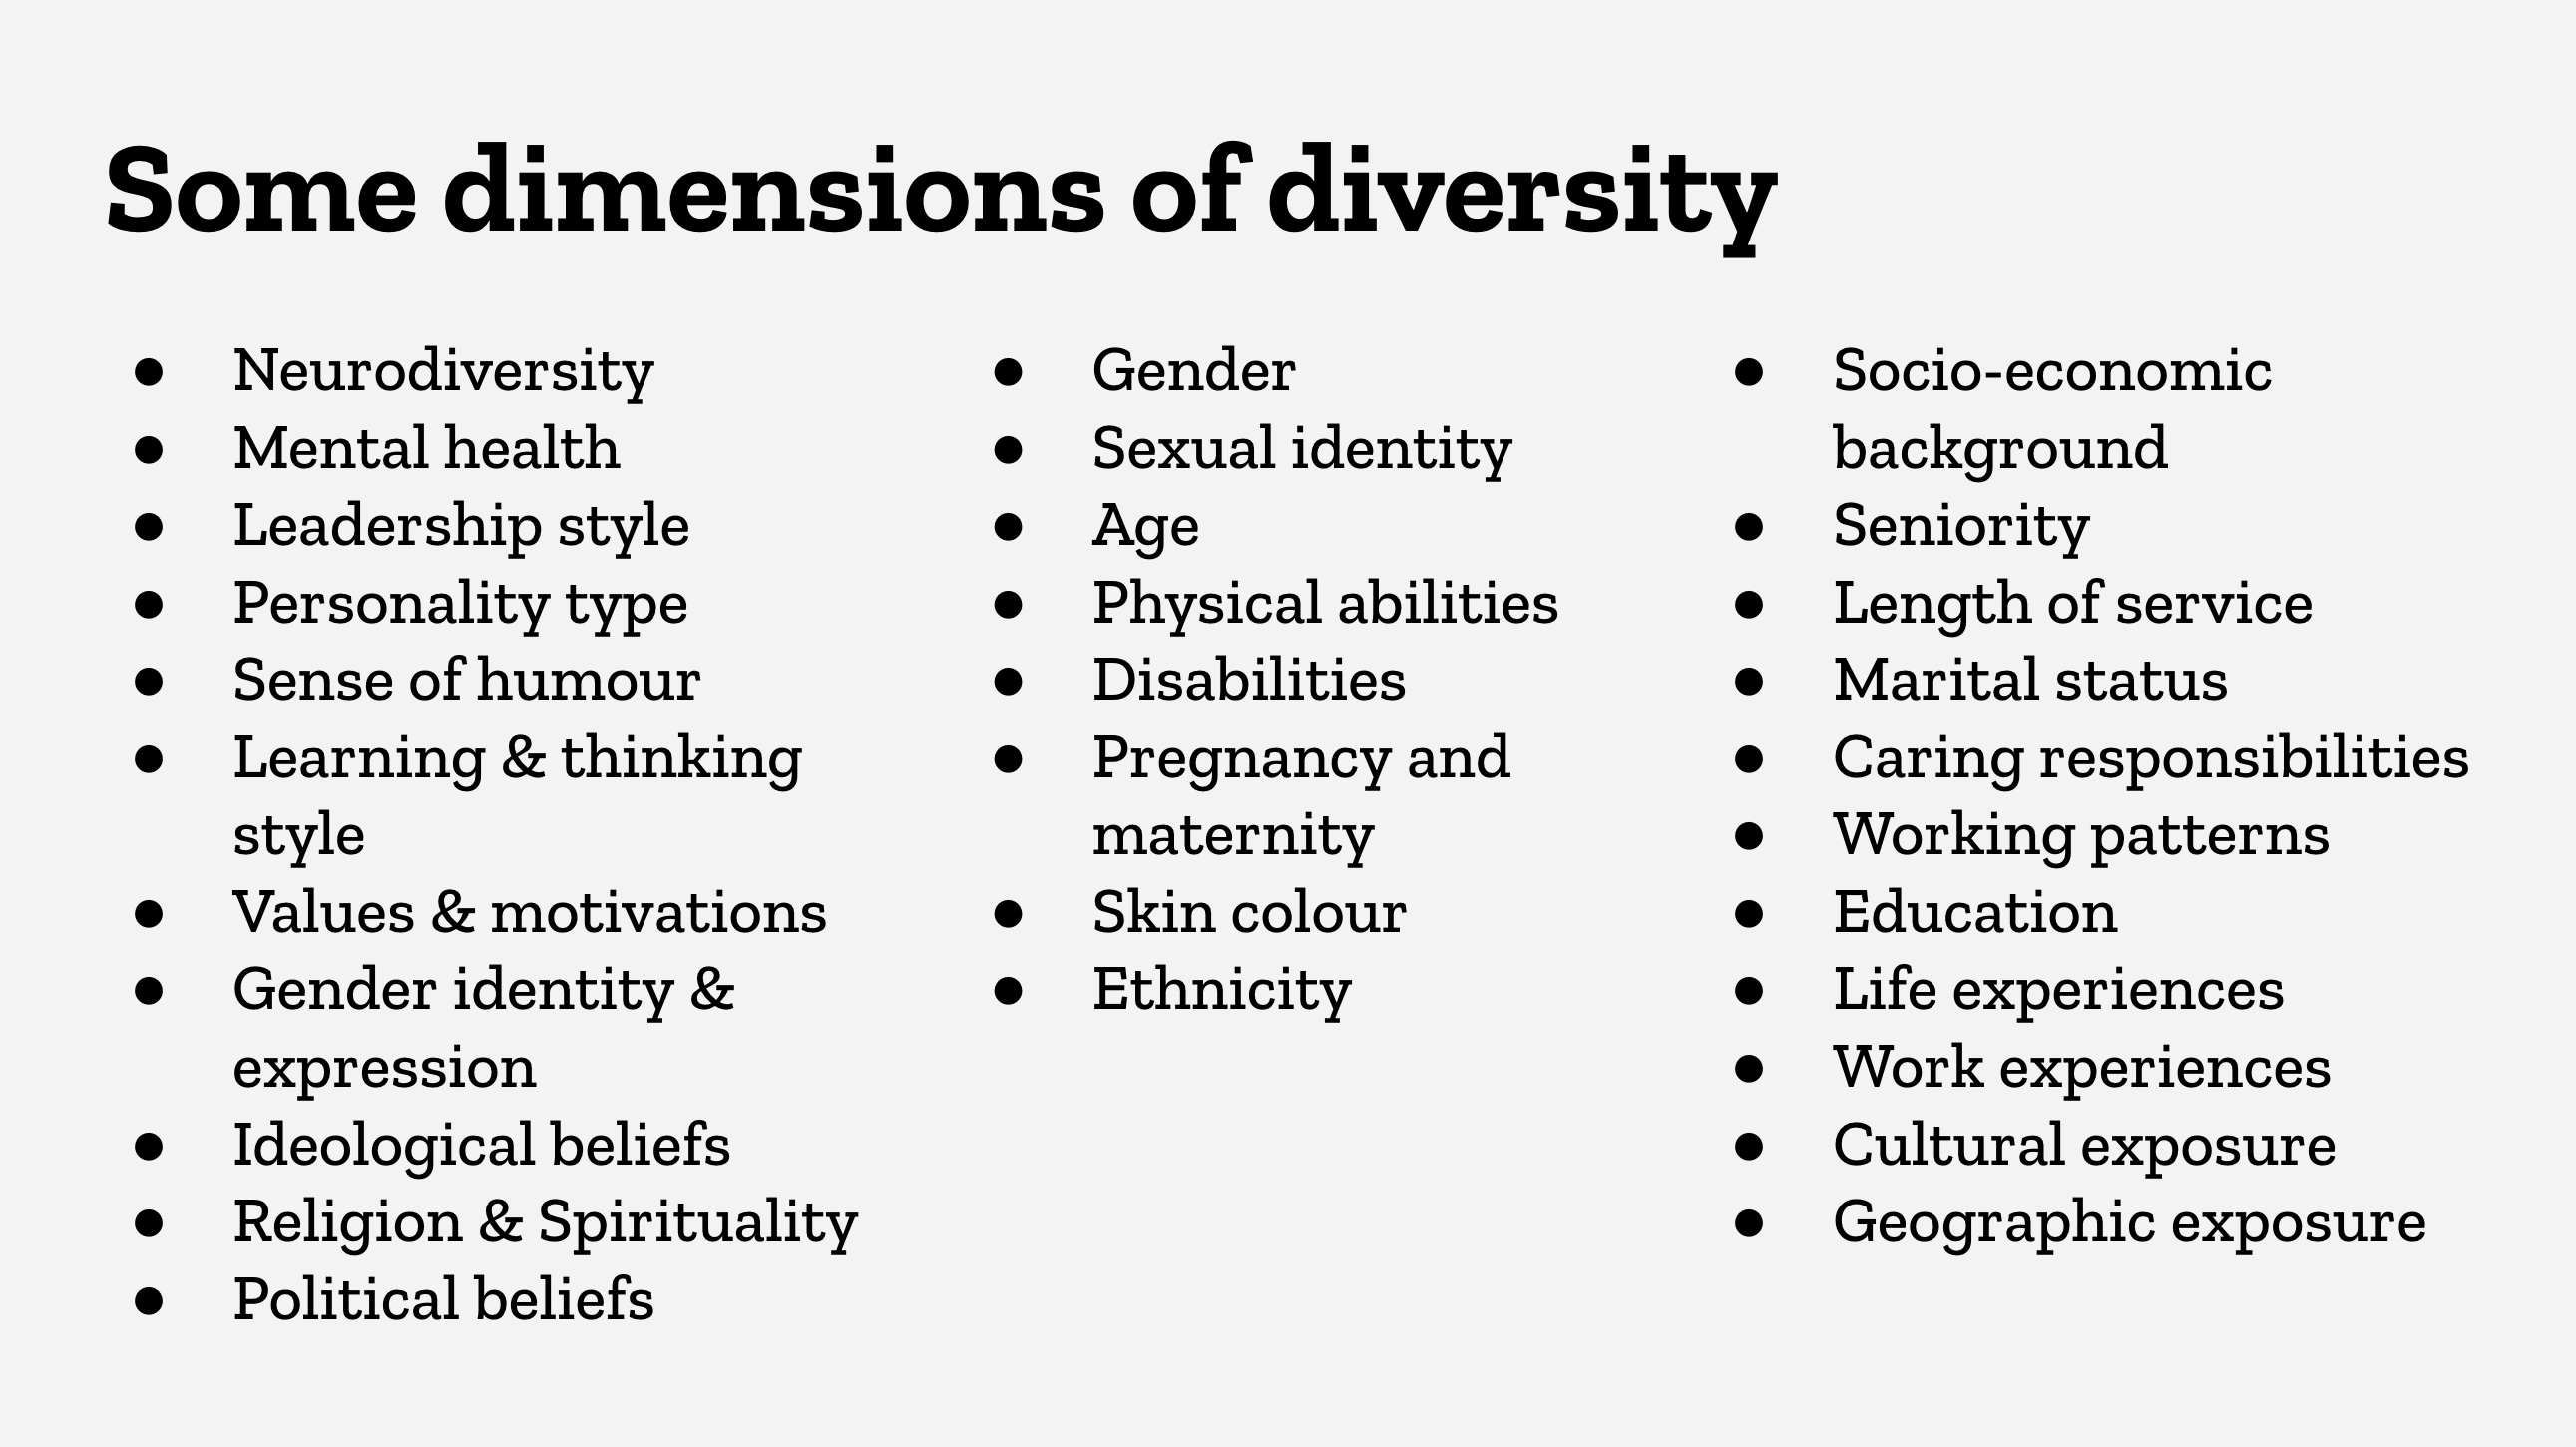 An image listing several dimensions of diversity, such as gender identity, learning styles, ethnicity and life experiences